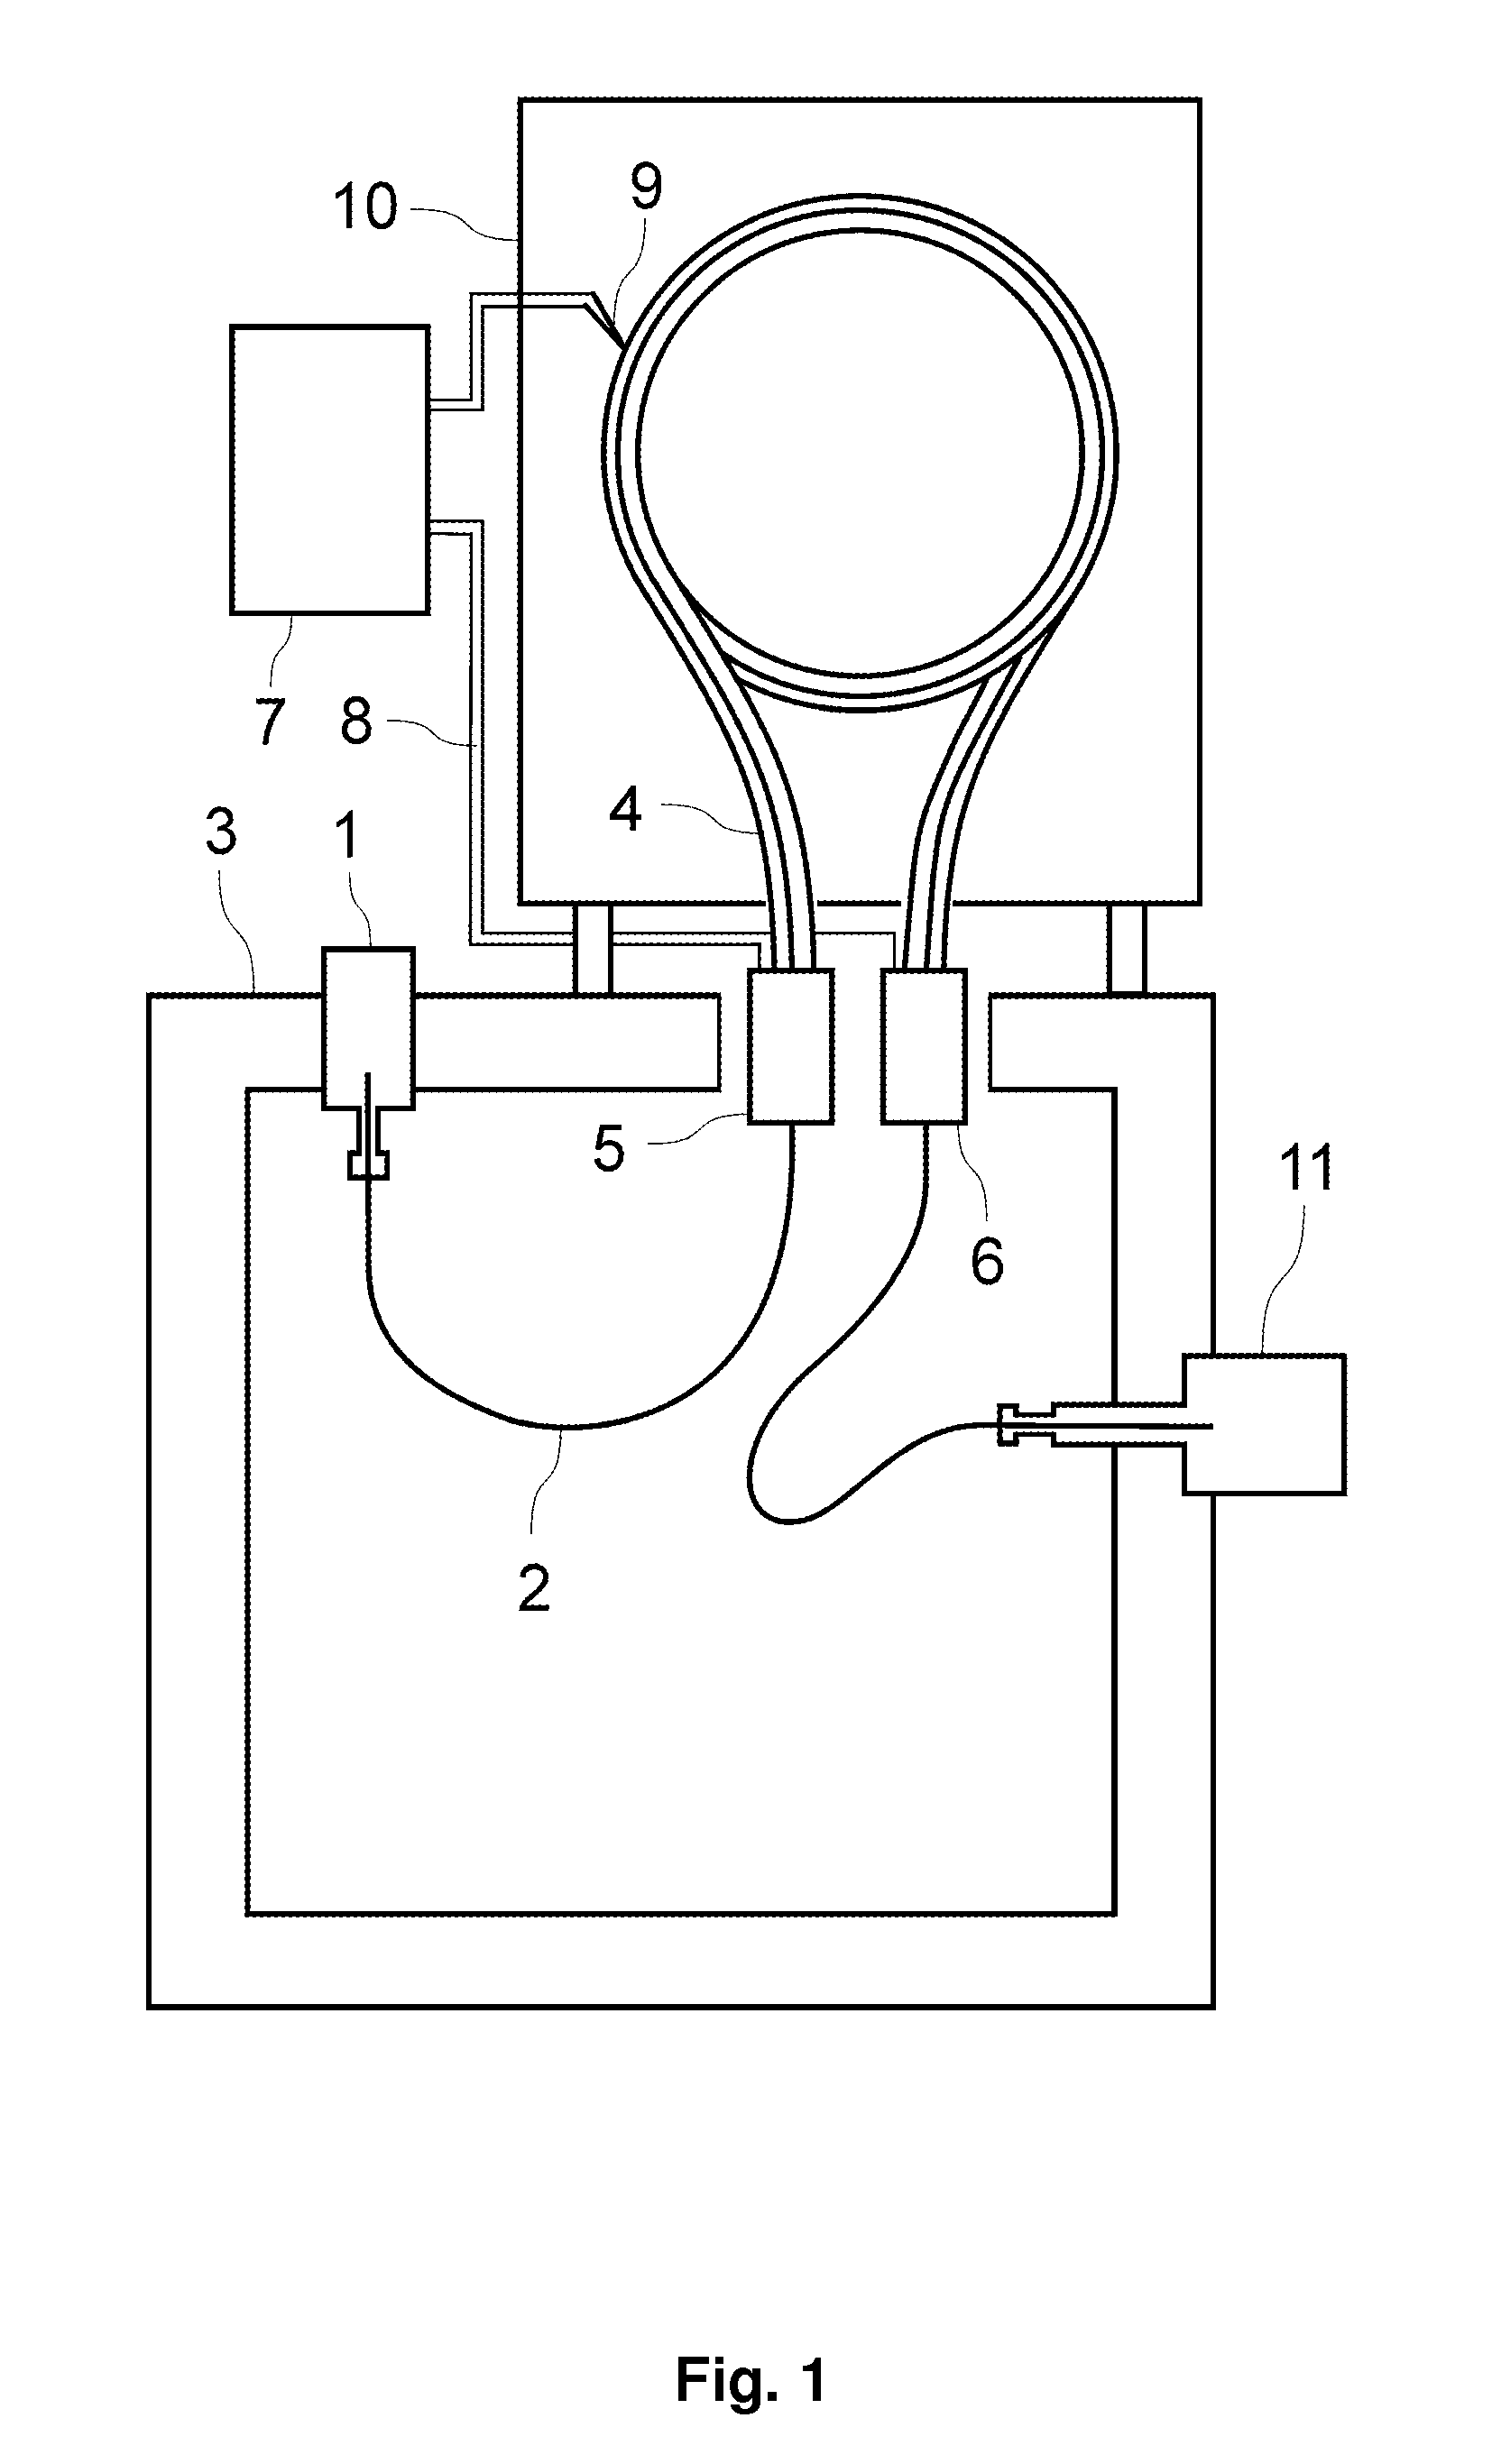 Fast gas chromatograph method and device for analyzing a sample